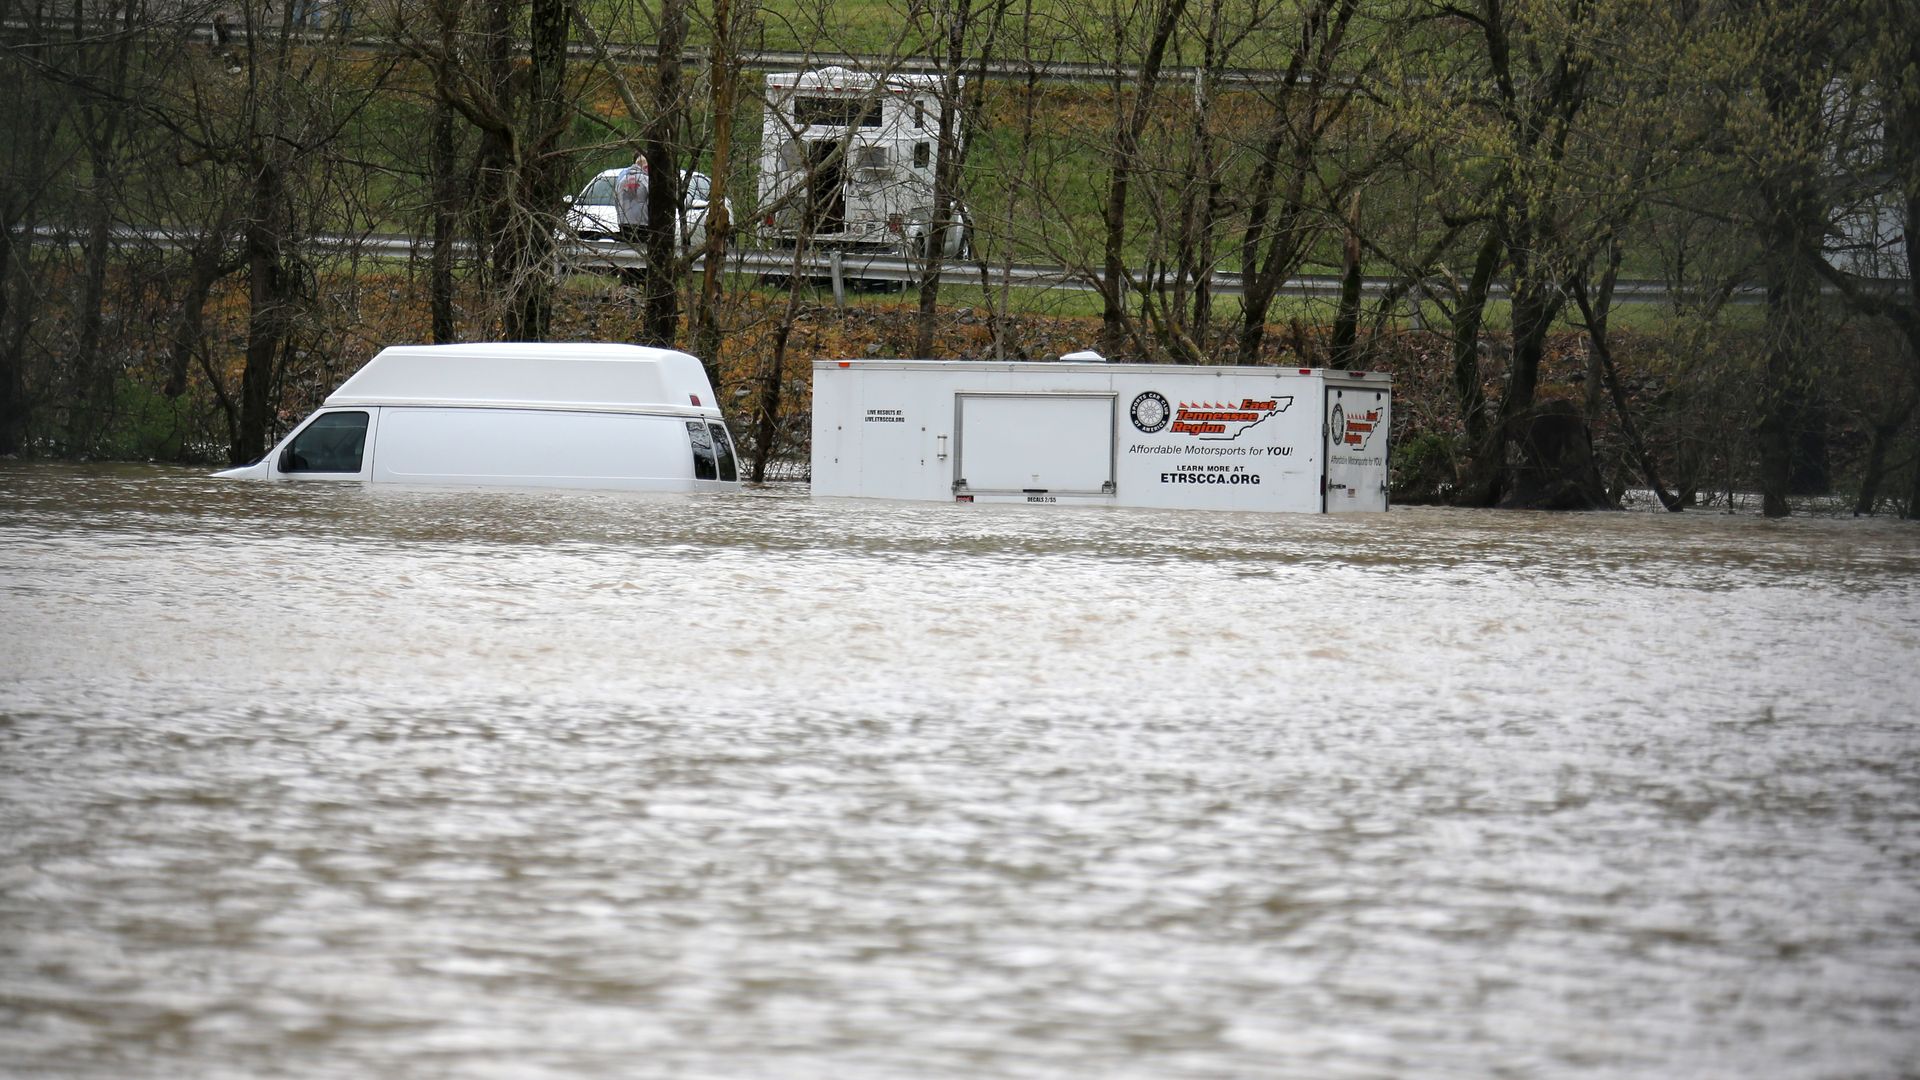  A van and trailer trapped in a parking lot due to local flooding during the weekend of the Food City Dirt Race on March 28, 2021 at Bristol Motor Speedway in Bristol, TN. 